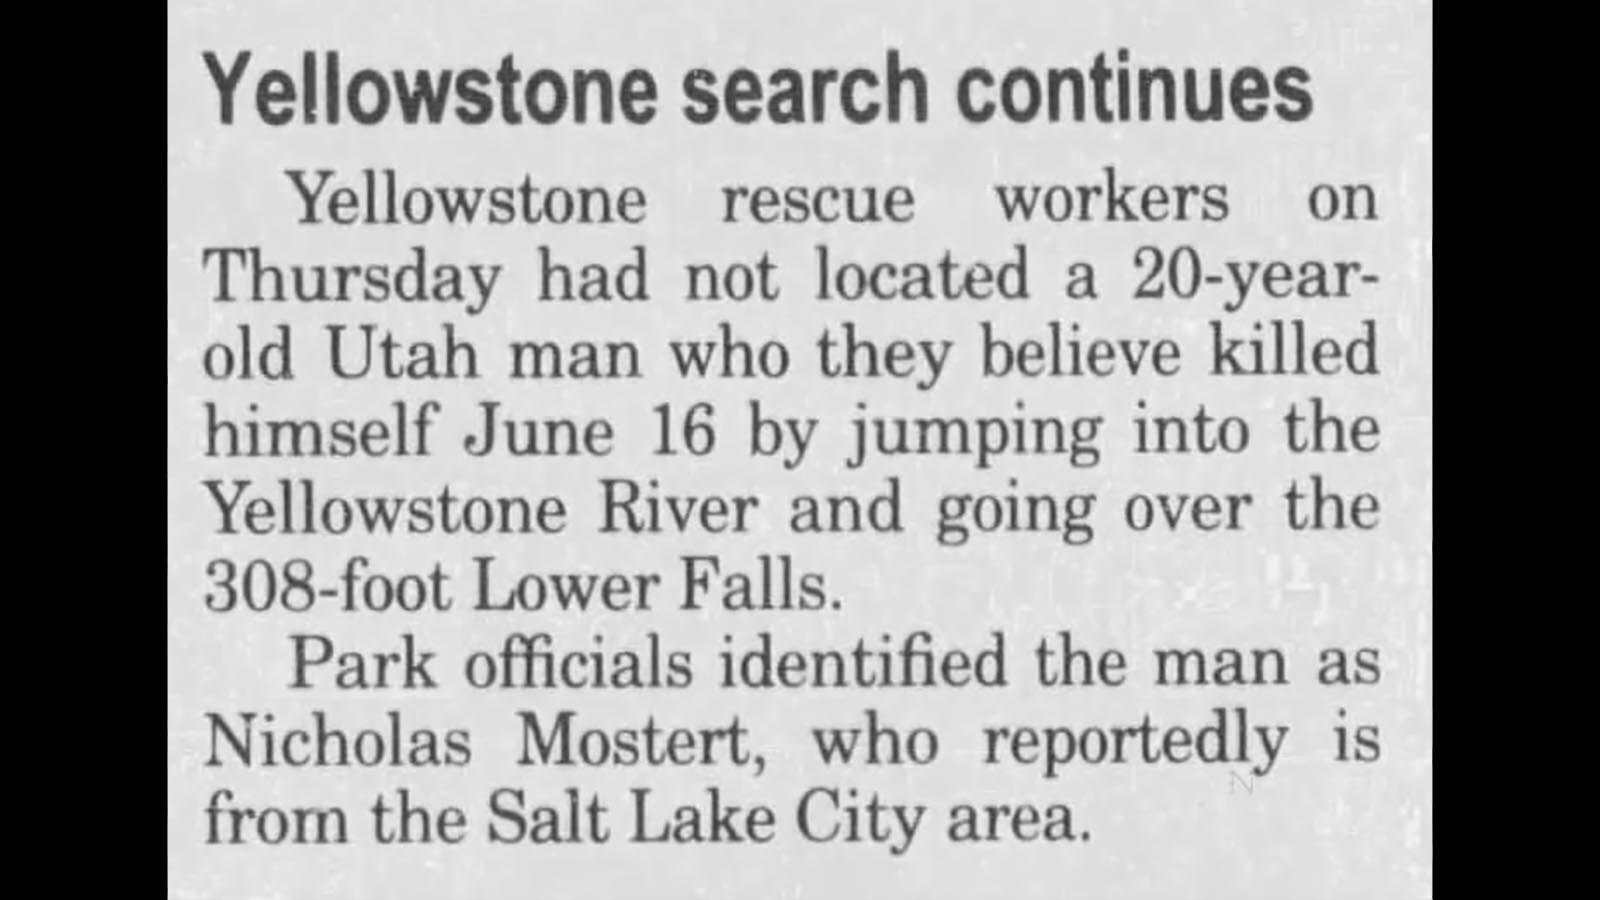 Nicholas Mostert was 20 when he is presumed to have drowned after jumping into the Lower Falls of the Yellowstone River on June 16, 2009.